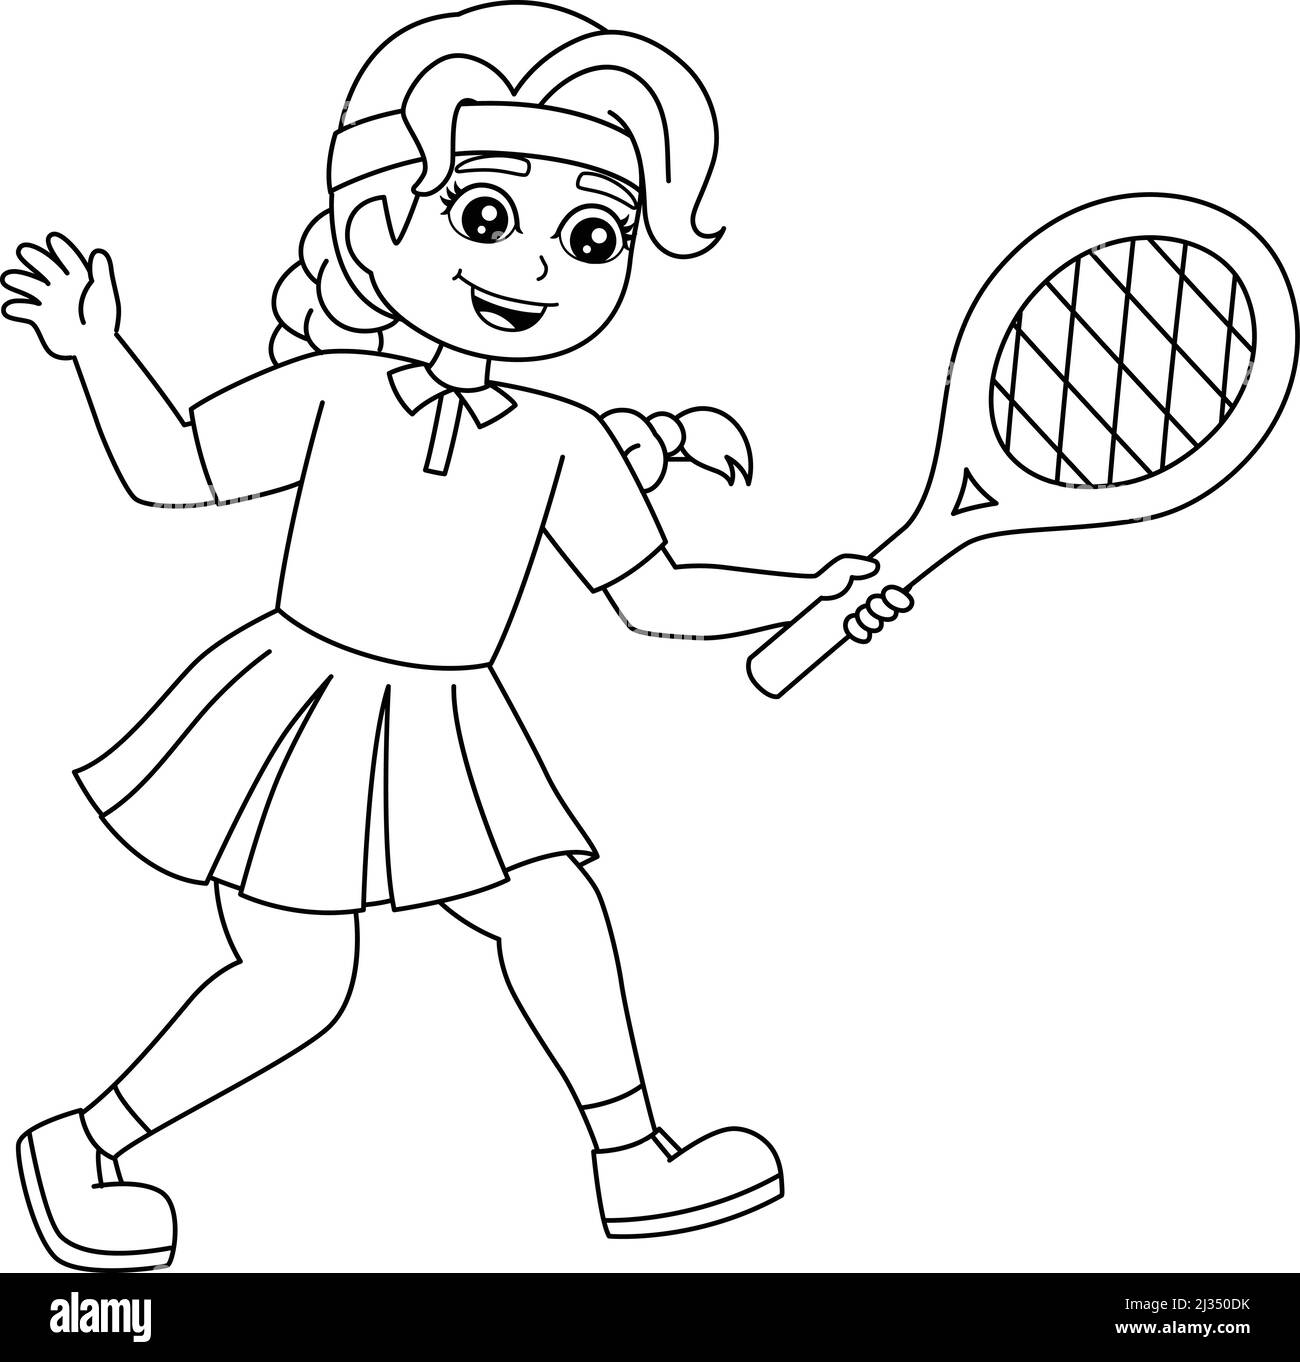 Girl Playing Tennis Coloring Page Isolated Stock Vector